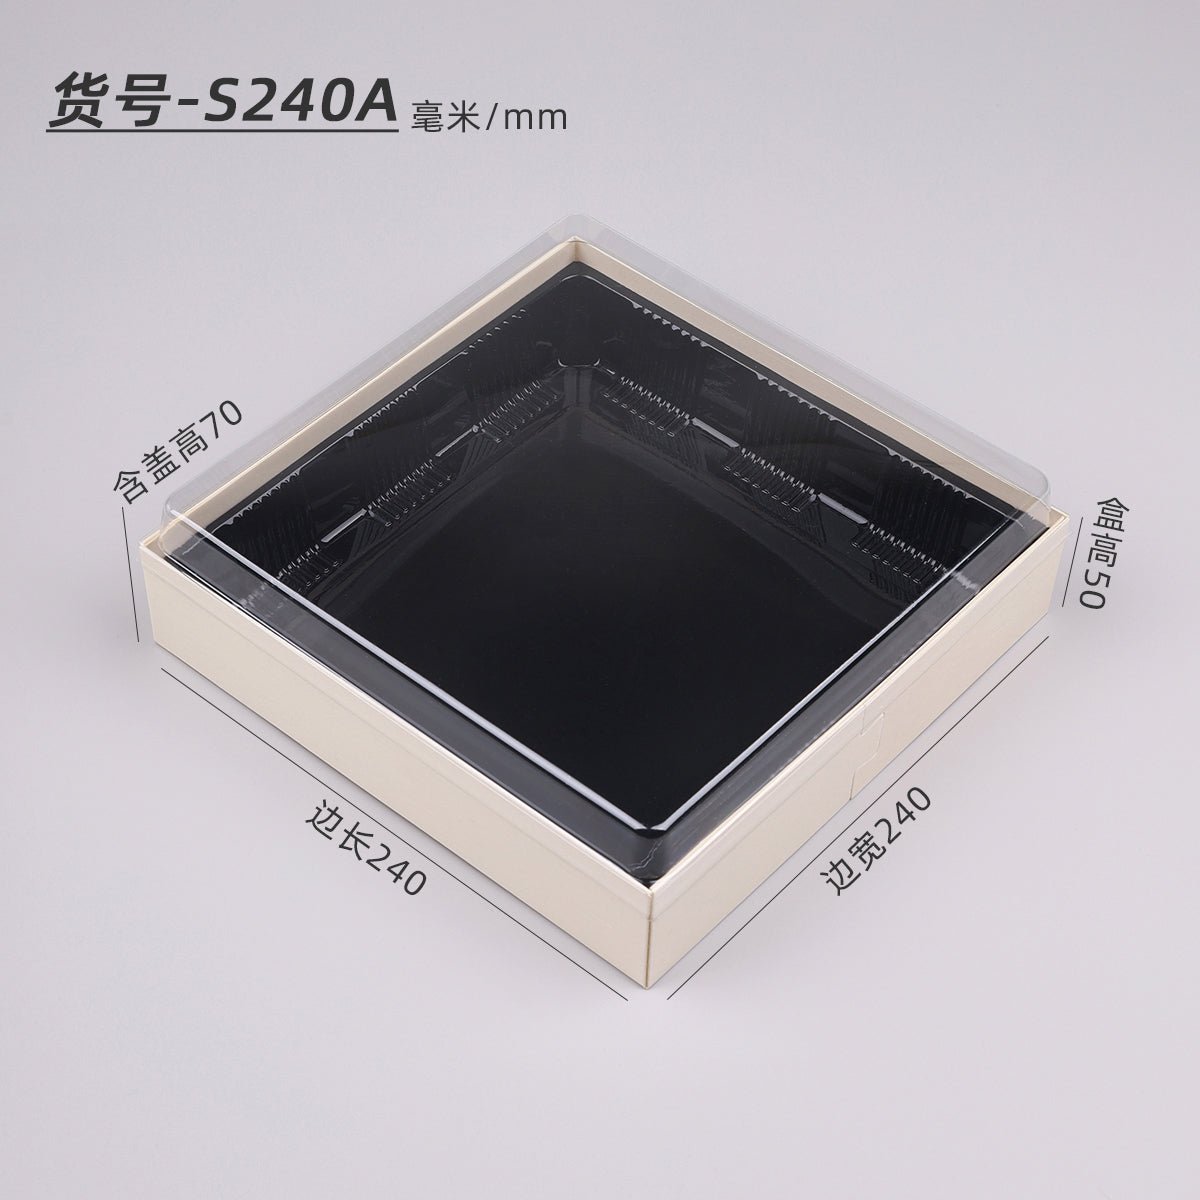 Sushi to-go box Japanese lunch box disposable sushi box wooden lunch box sashimi take-out box commercial packaging box - CokMaster